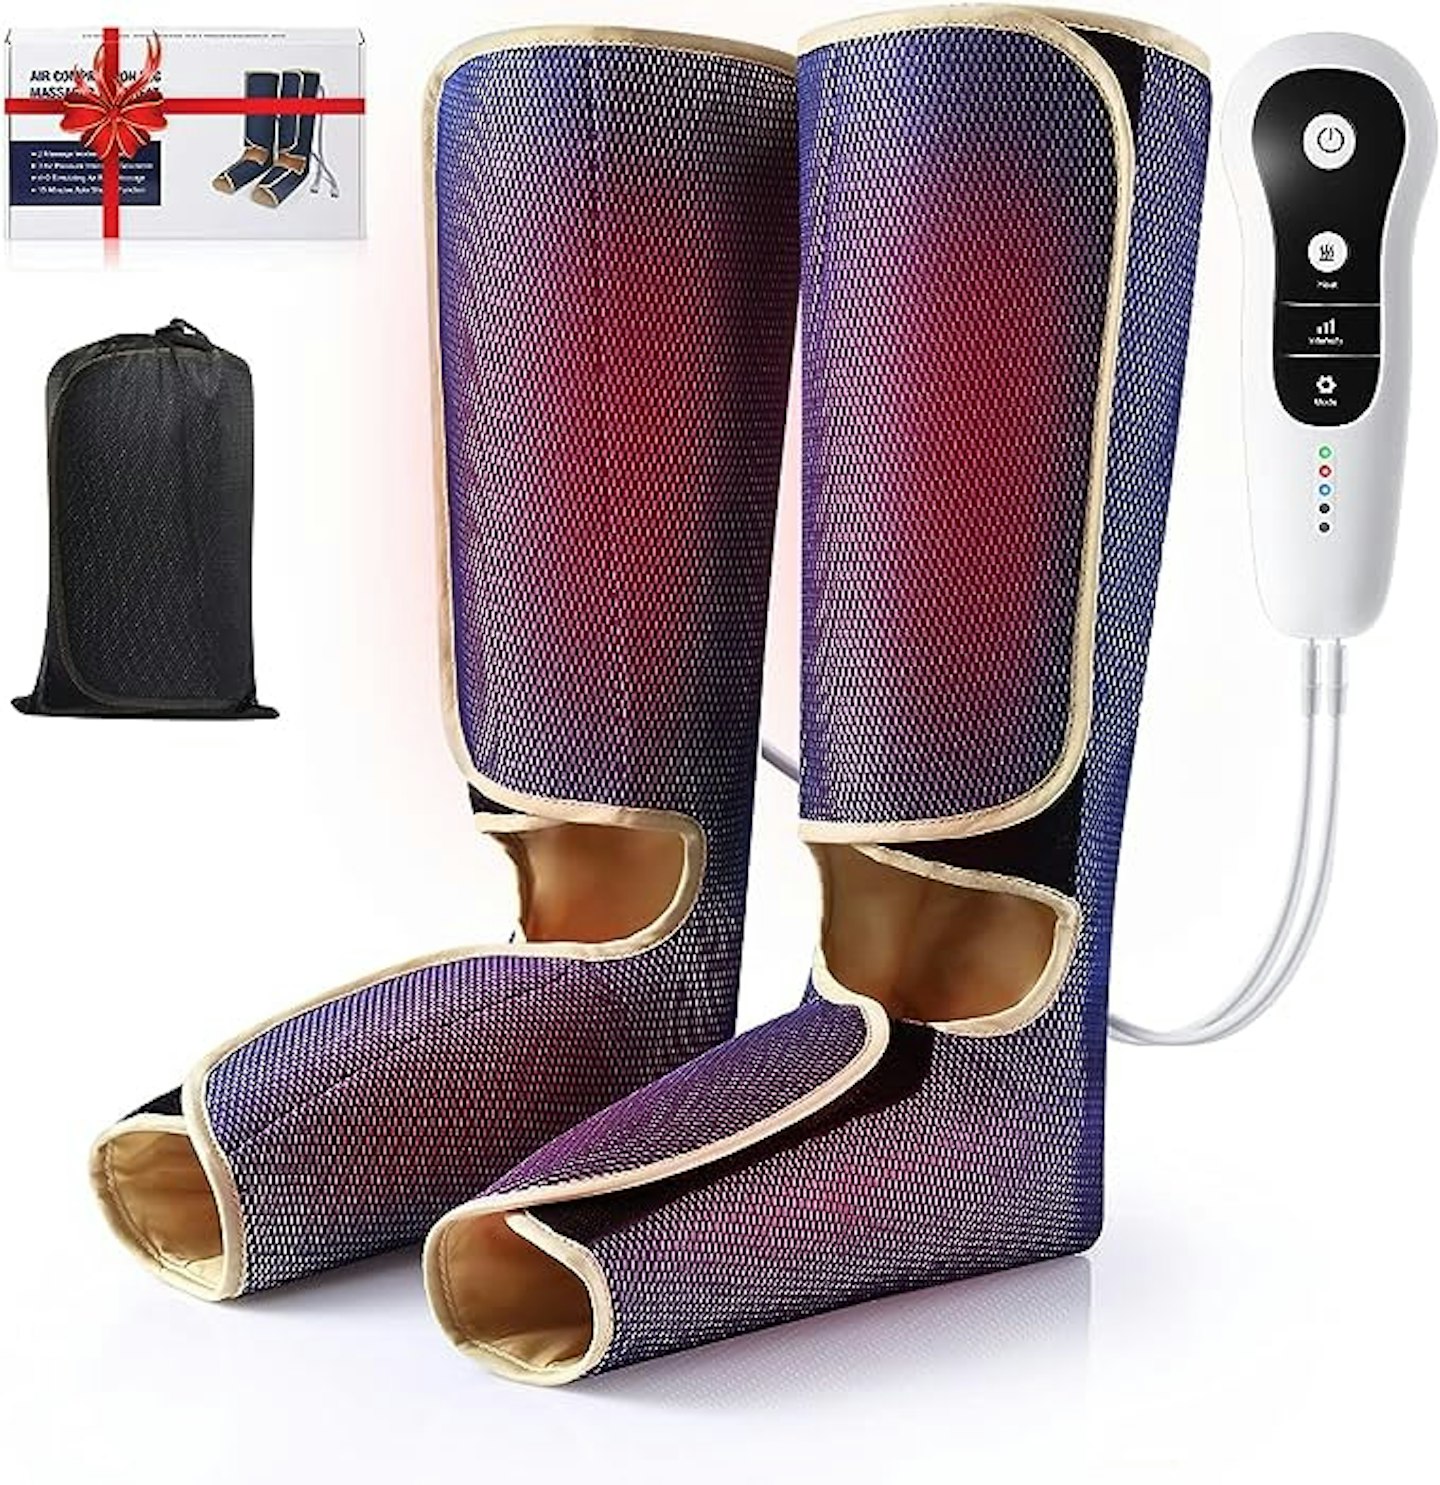 Creliver Leg Massagers For Pain and Circulation